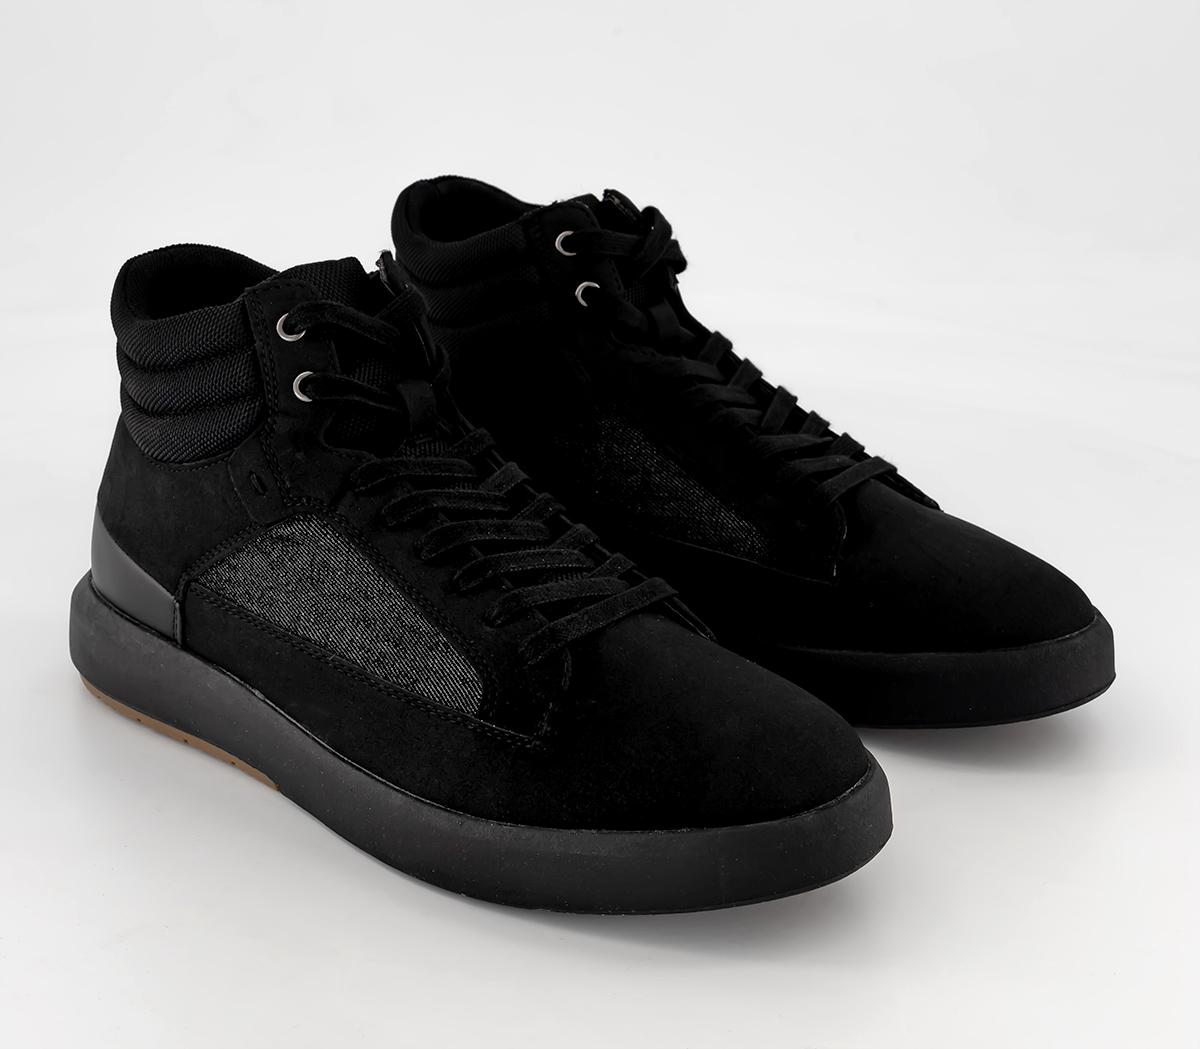 OFFICE Colin Wedge Mid Top Sneakers Black - Men's Casual Shoes